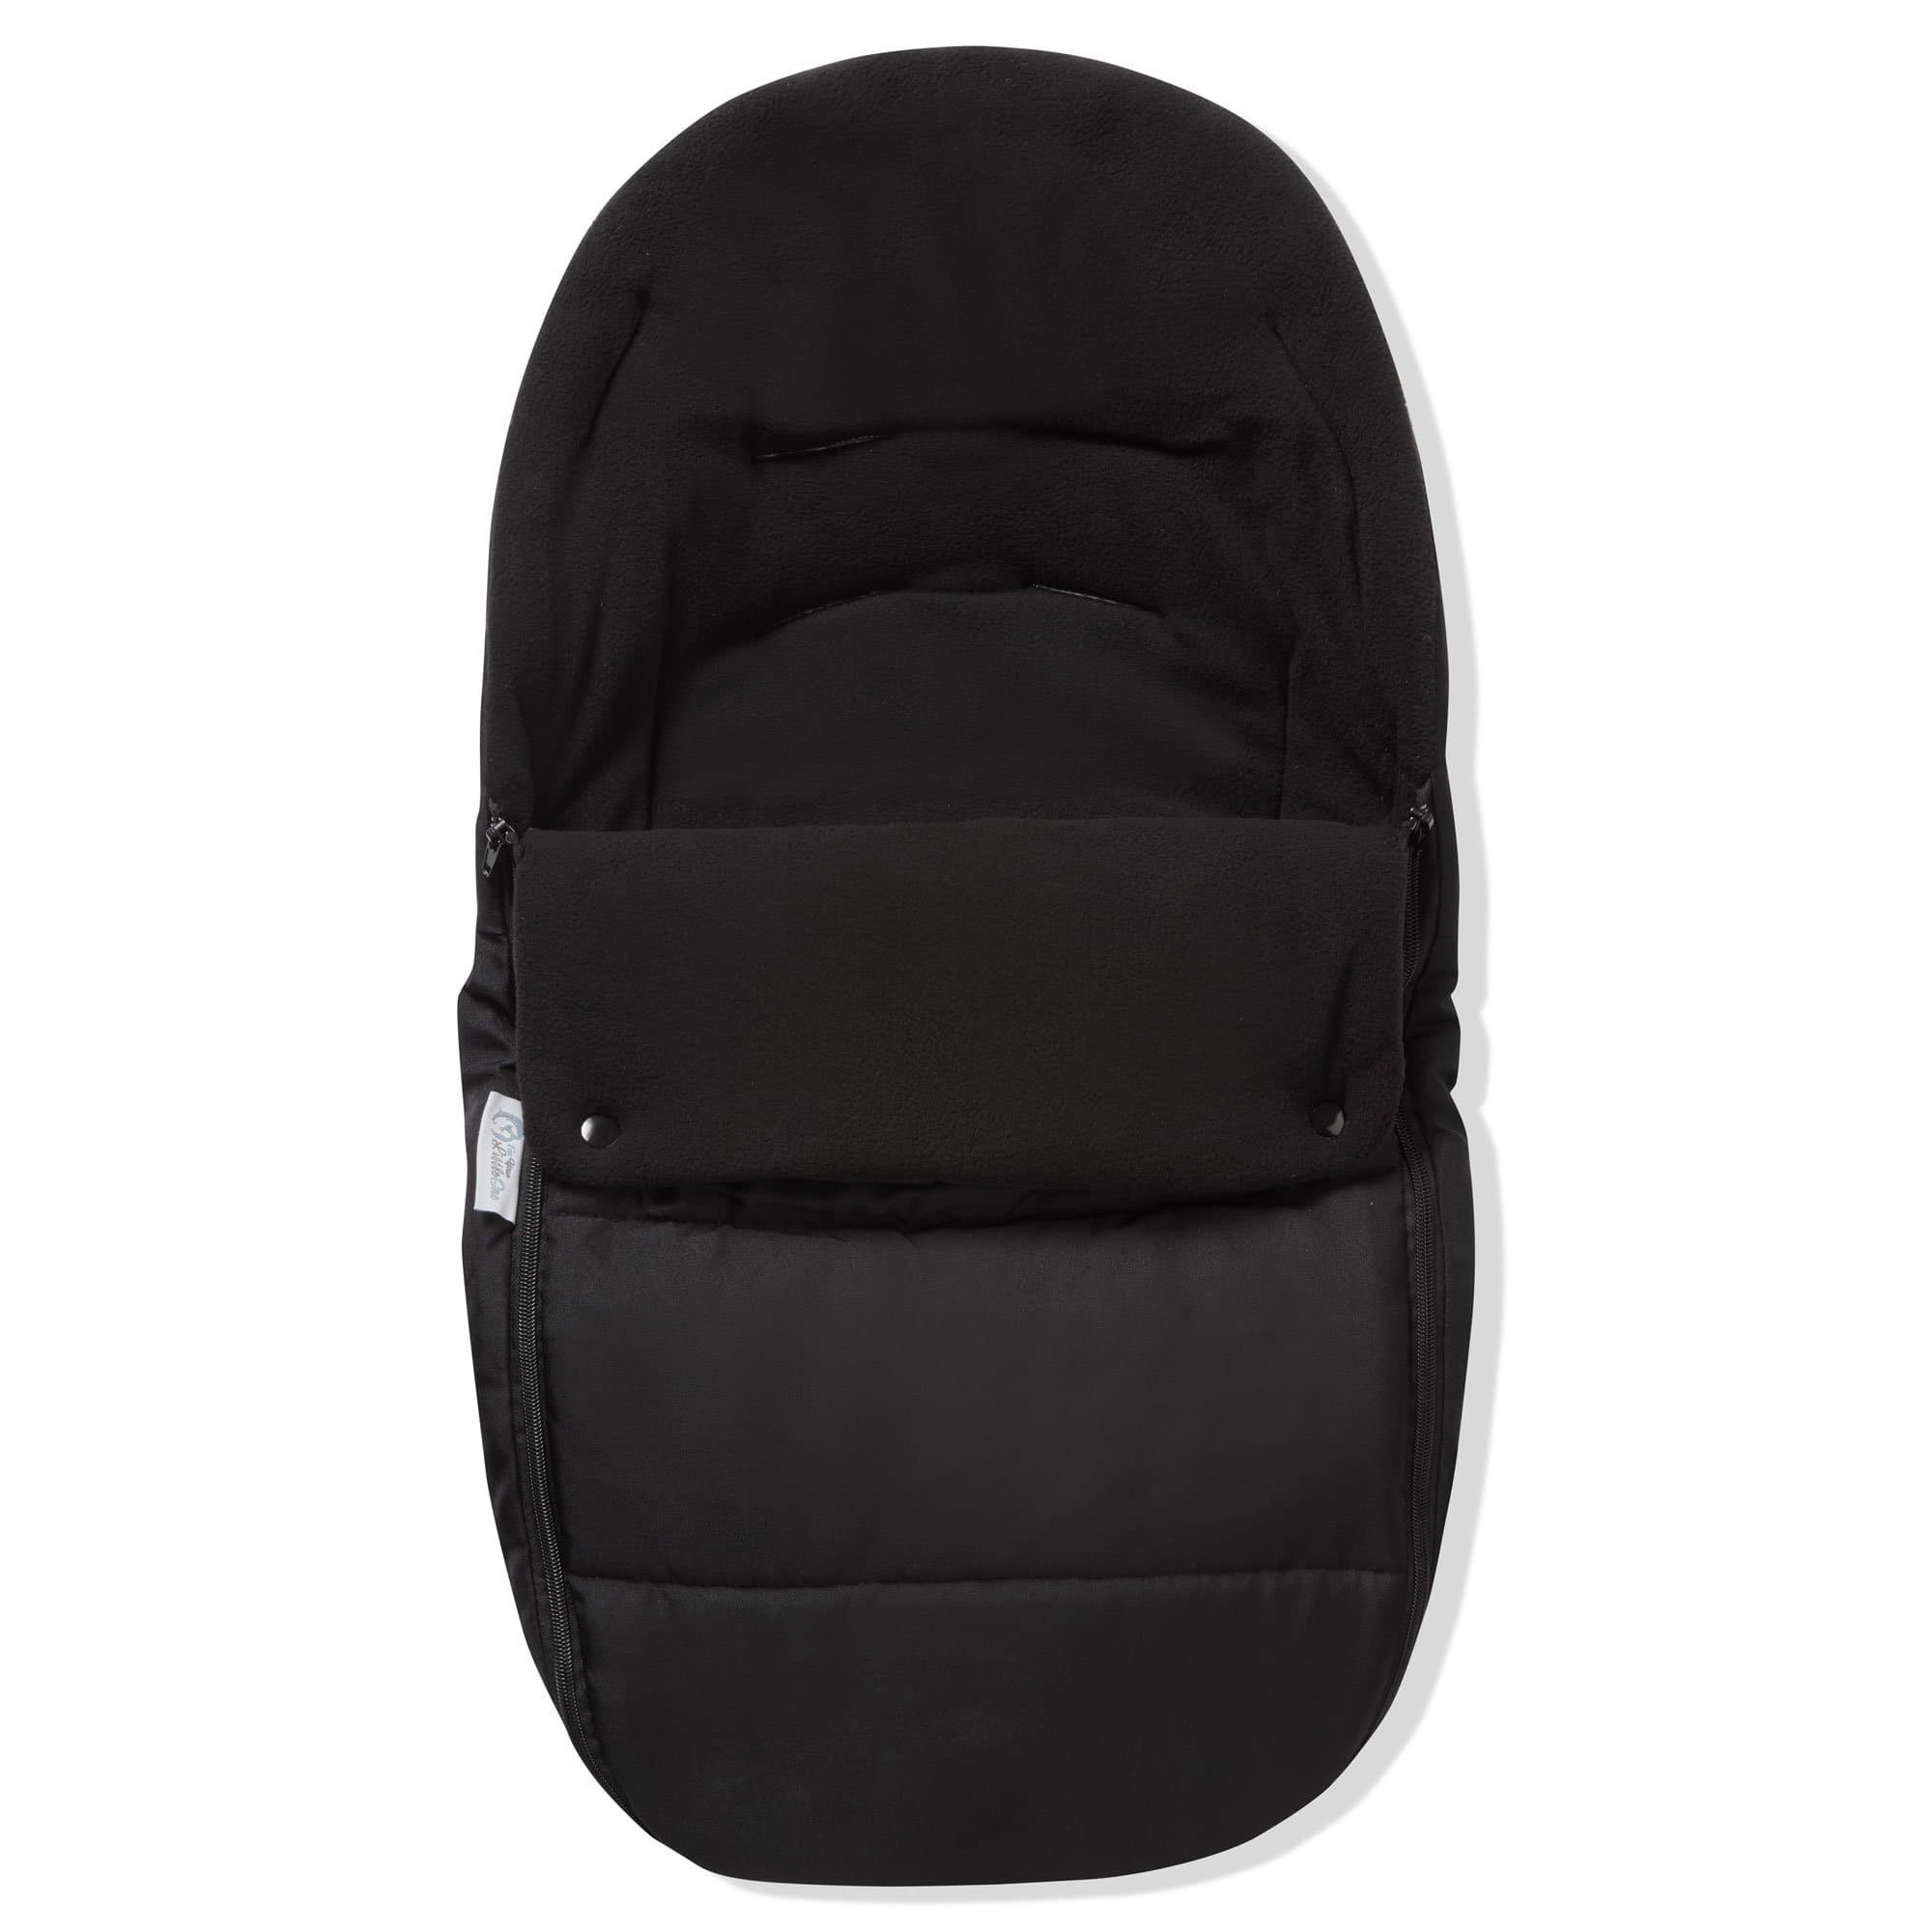 Premium Car Seat Footmuff / Cosy Toes Compatible With Joolz - Black Jack / Fits All Models | For Your Little One